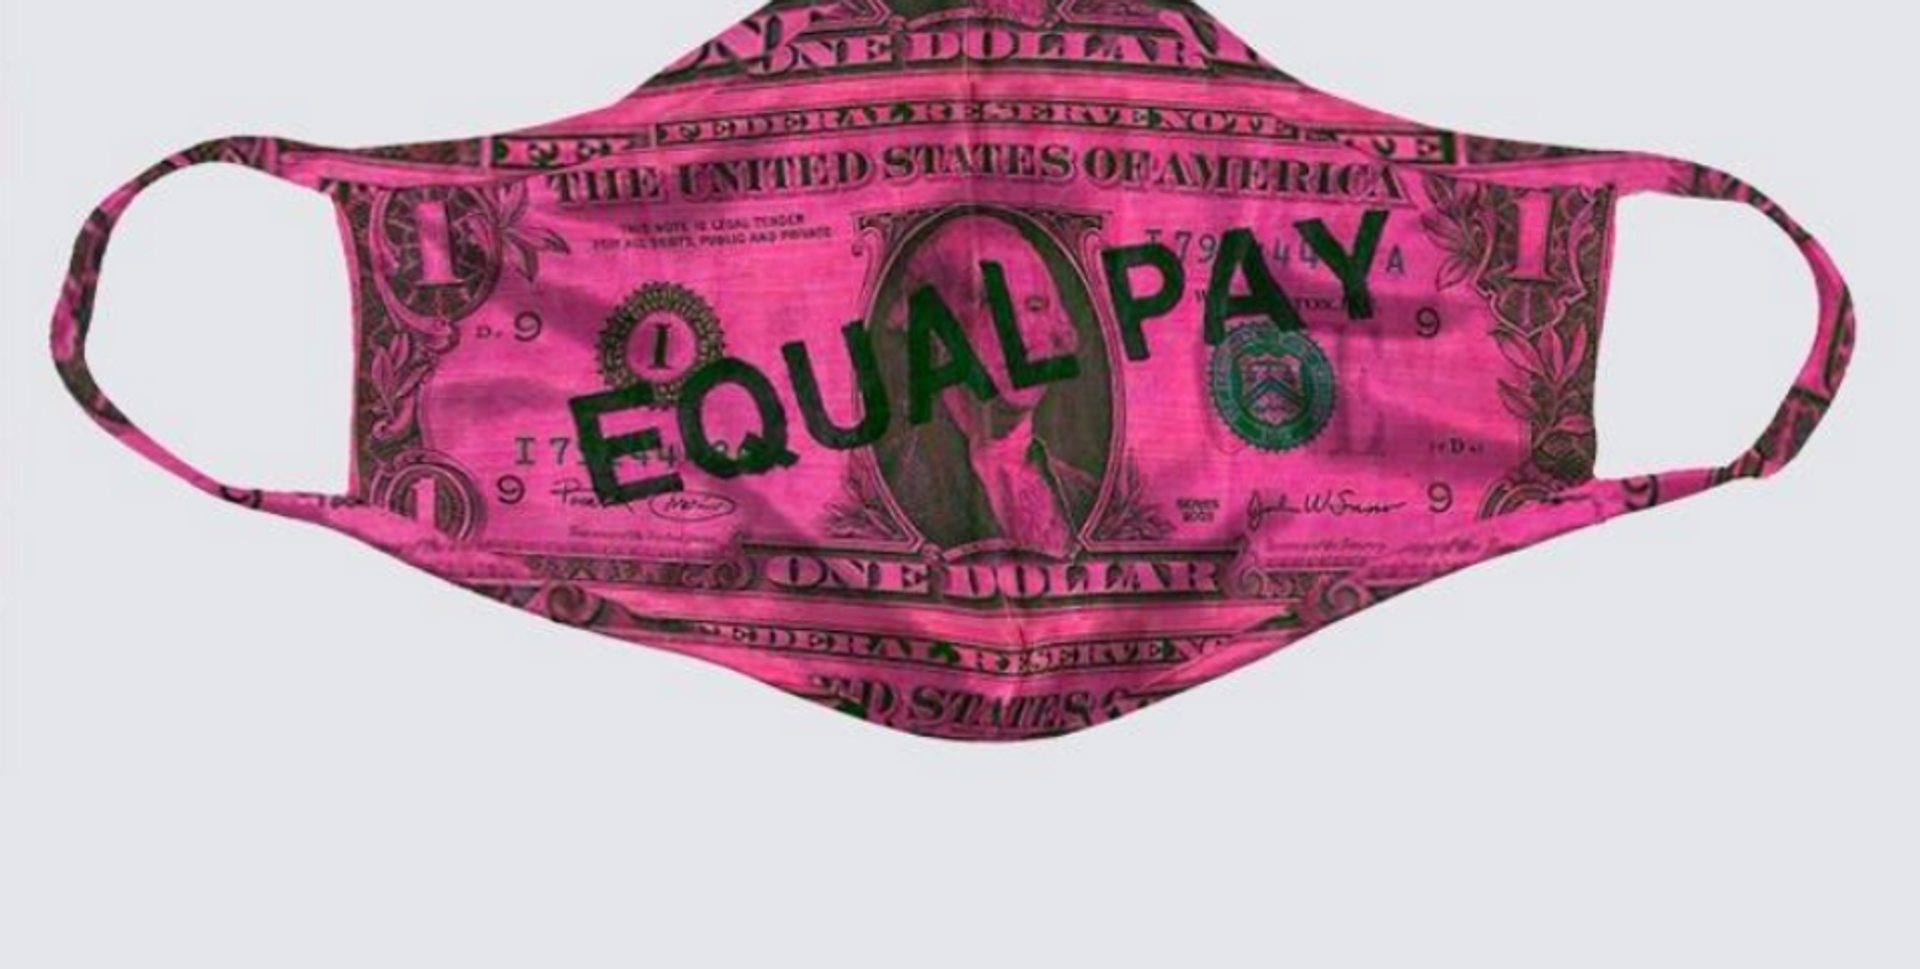 Michele Pred's equal pay mask. Photo courtesy of the artist Michele Pred's equal pay mask. Photo courtesy of the artist